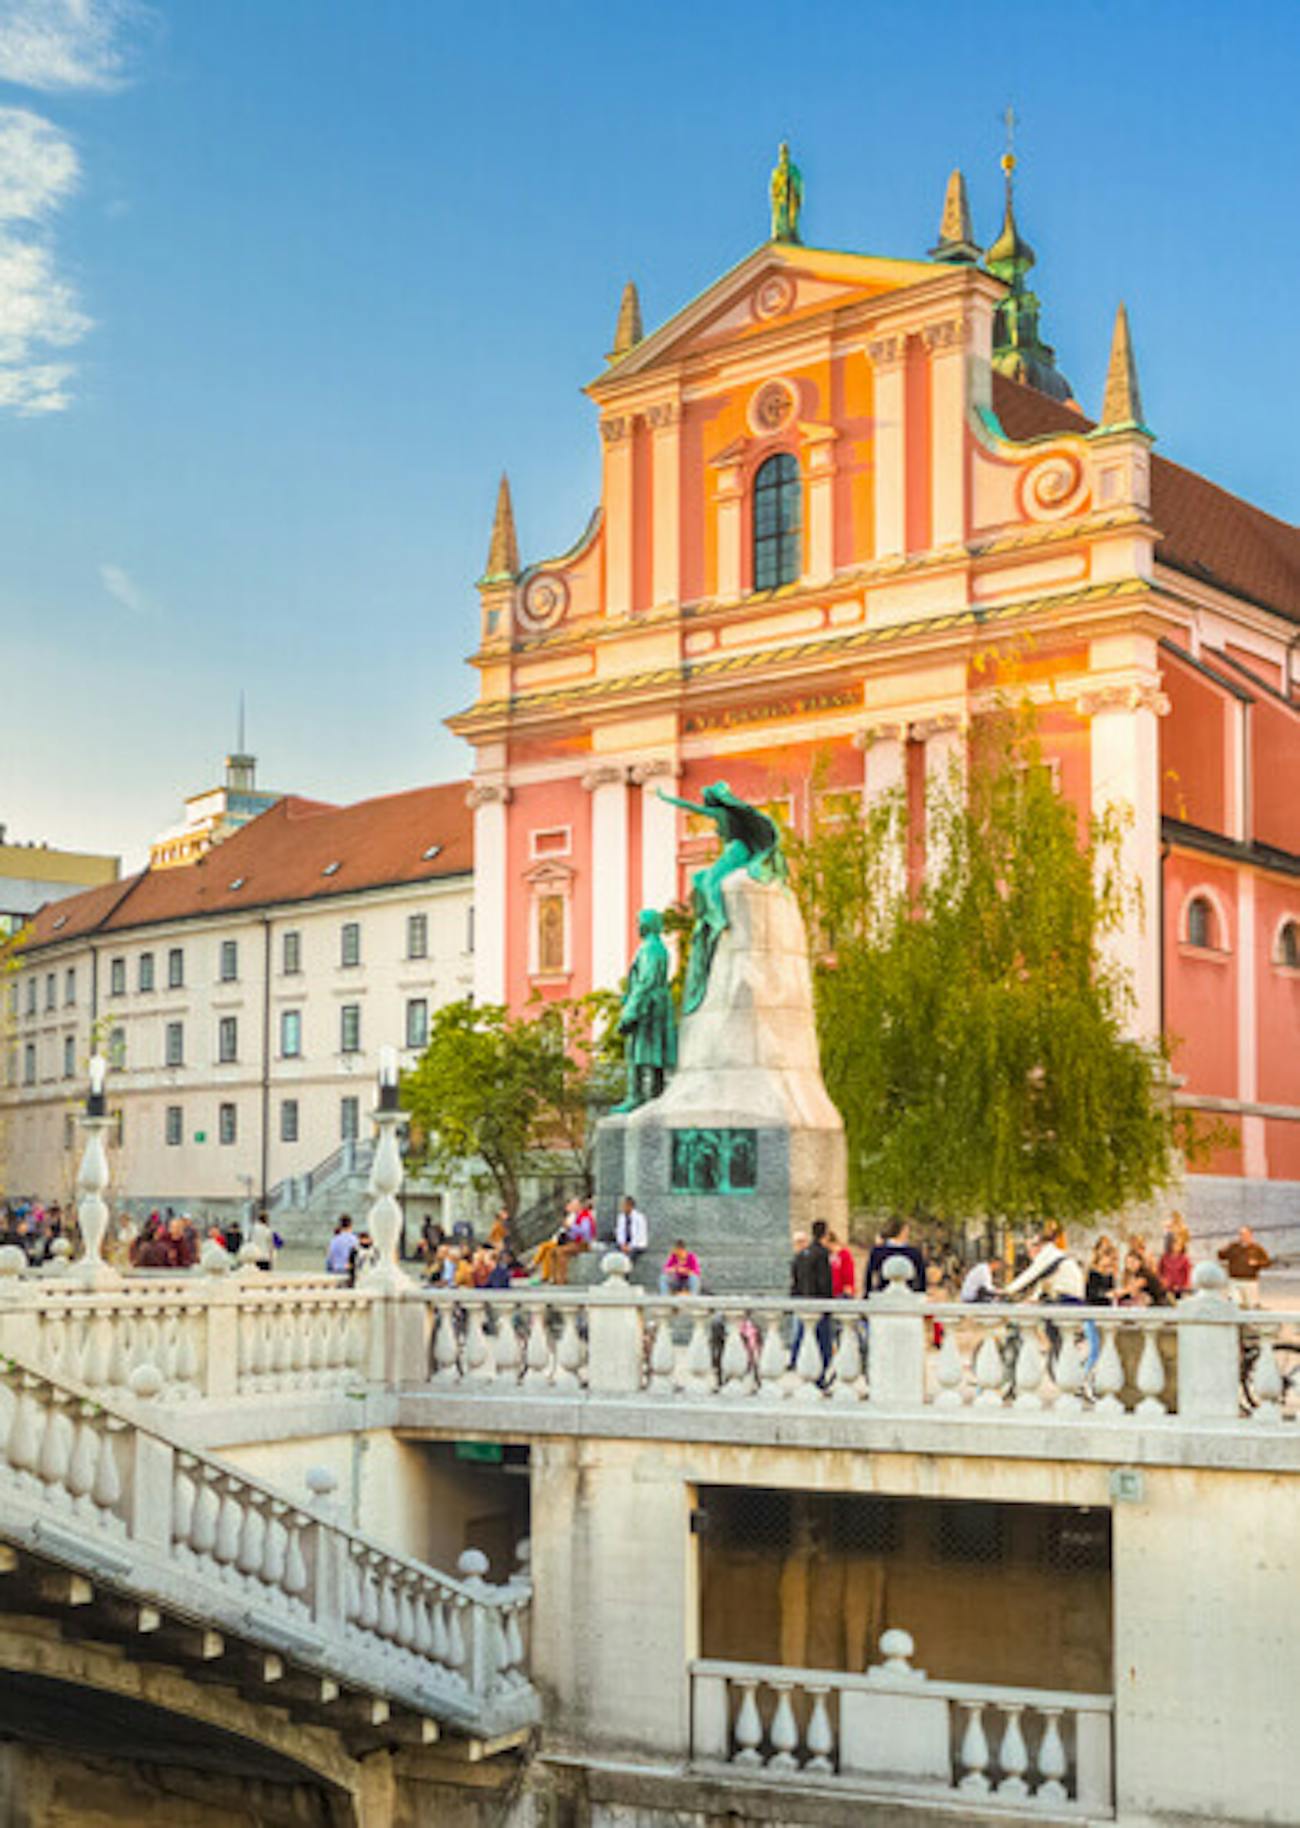 Pink-coloured Baroque church with statue in front in Ljubljana, Slovenia